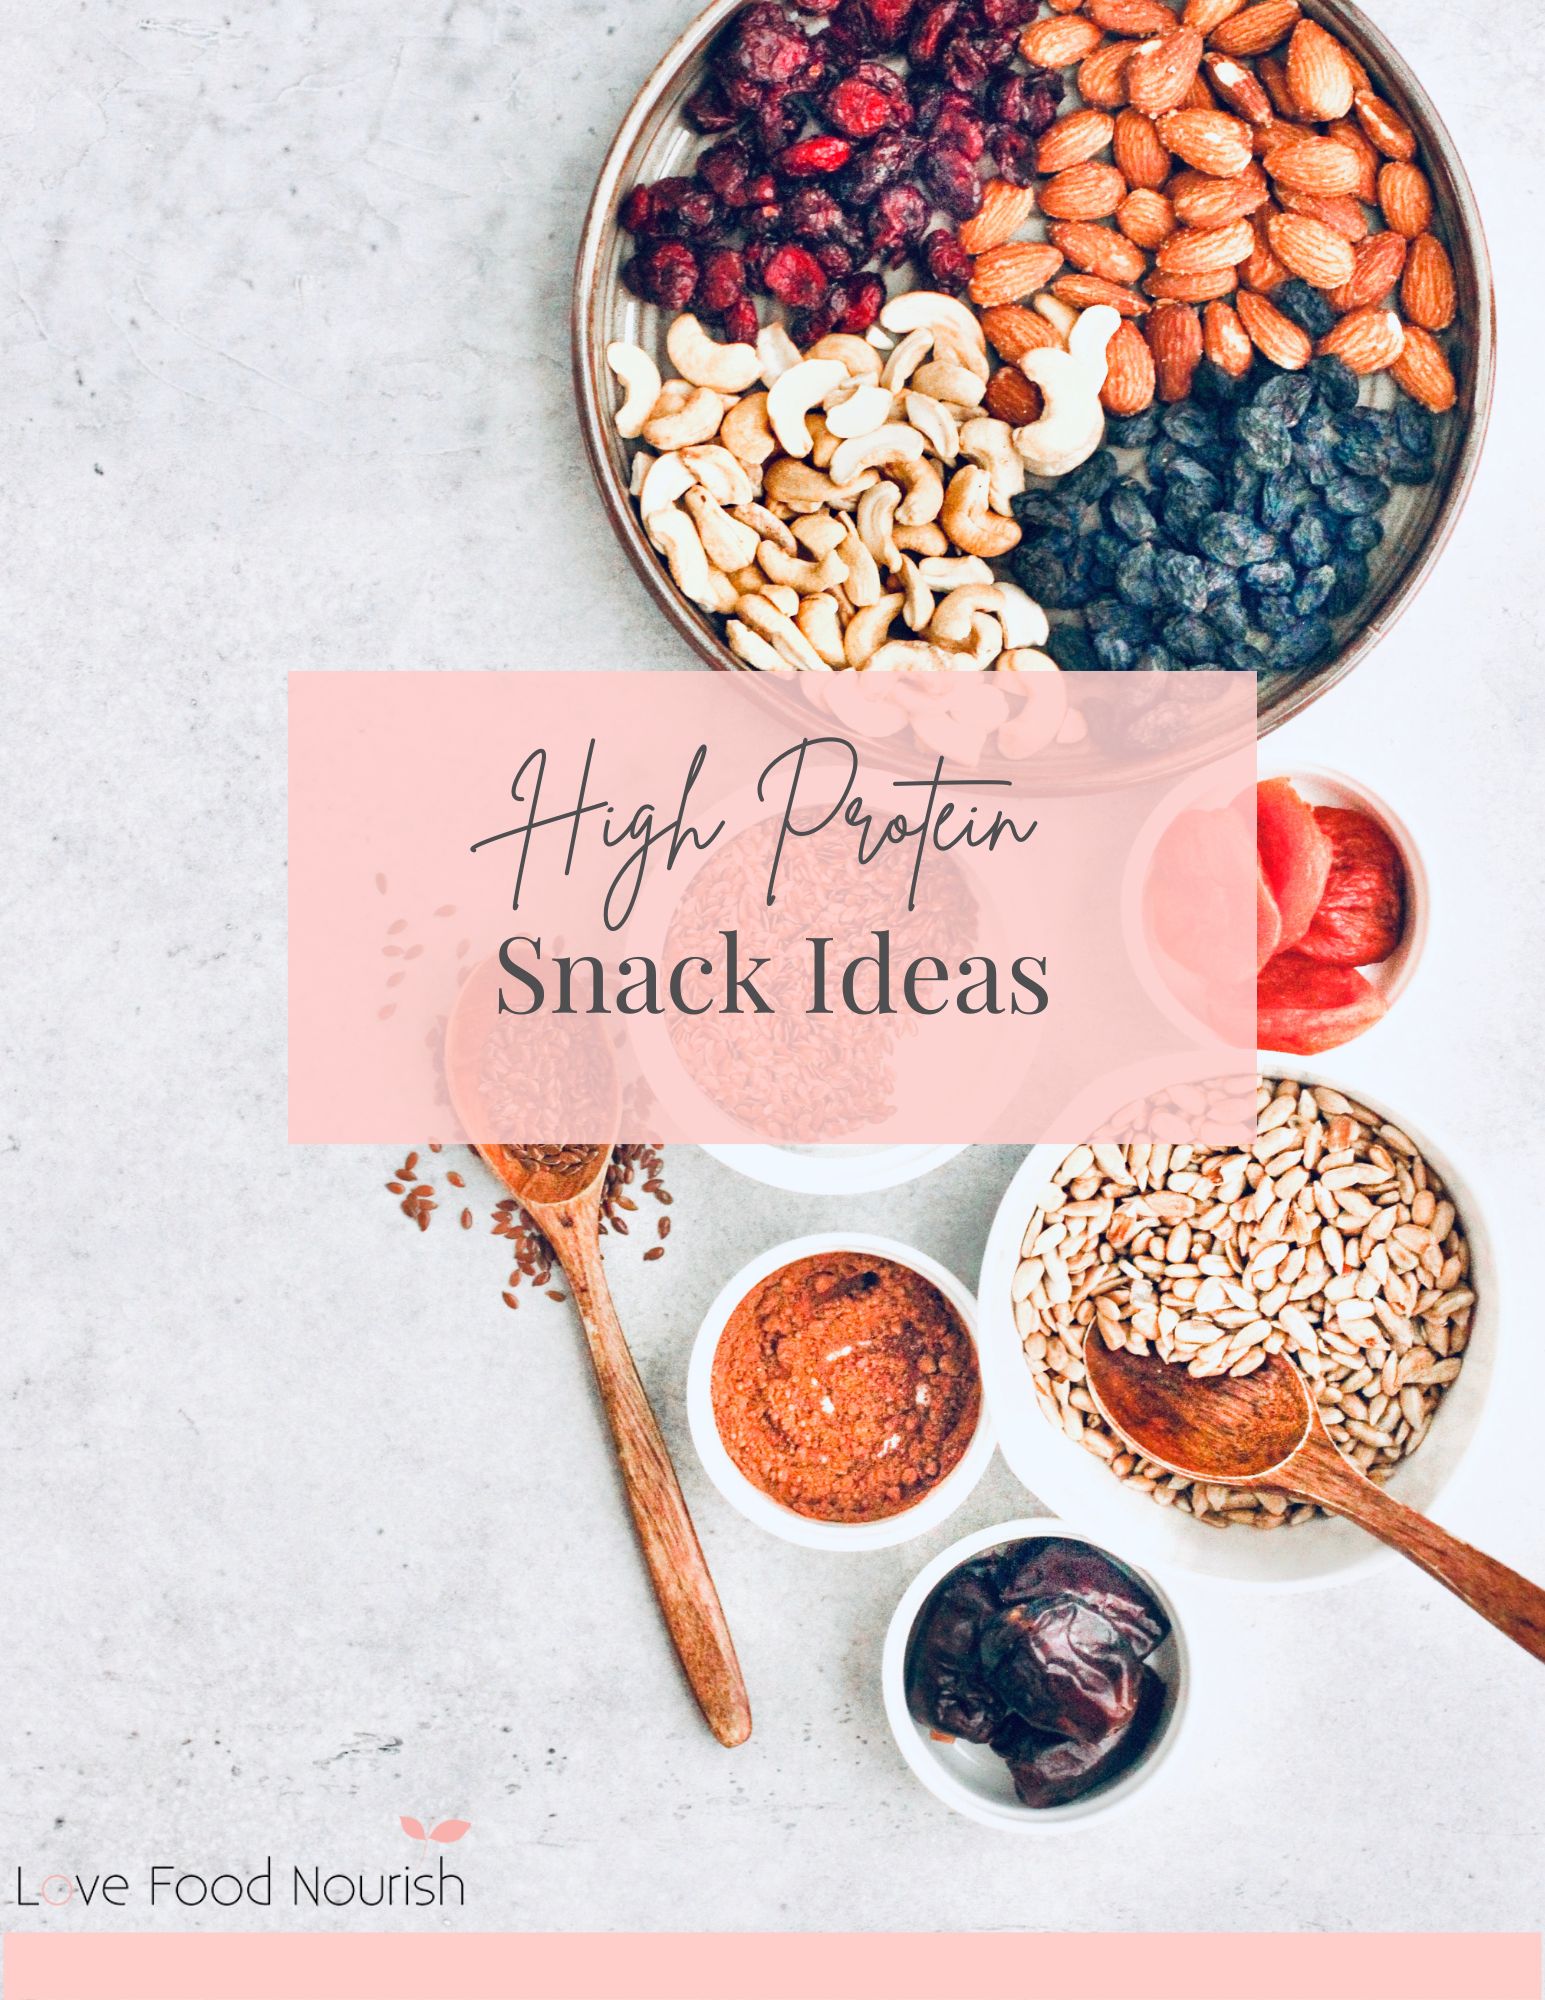 Snacks with High Protein Snack Ideas in text overlay.